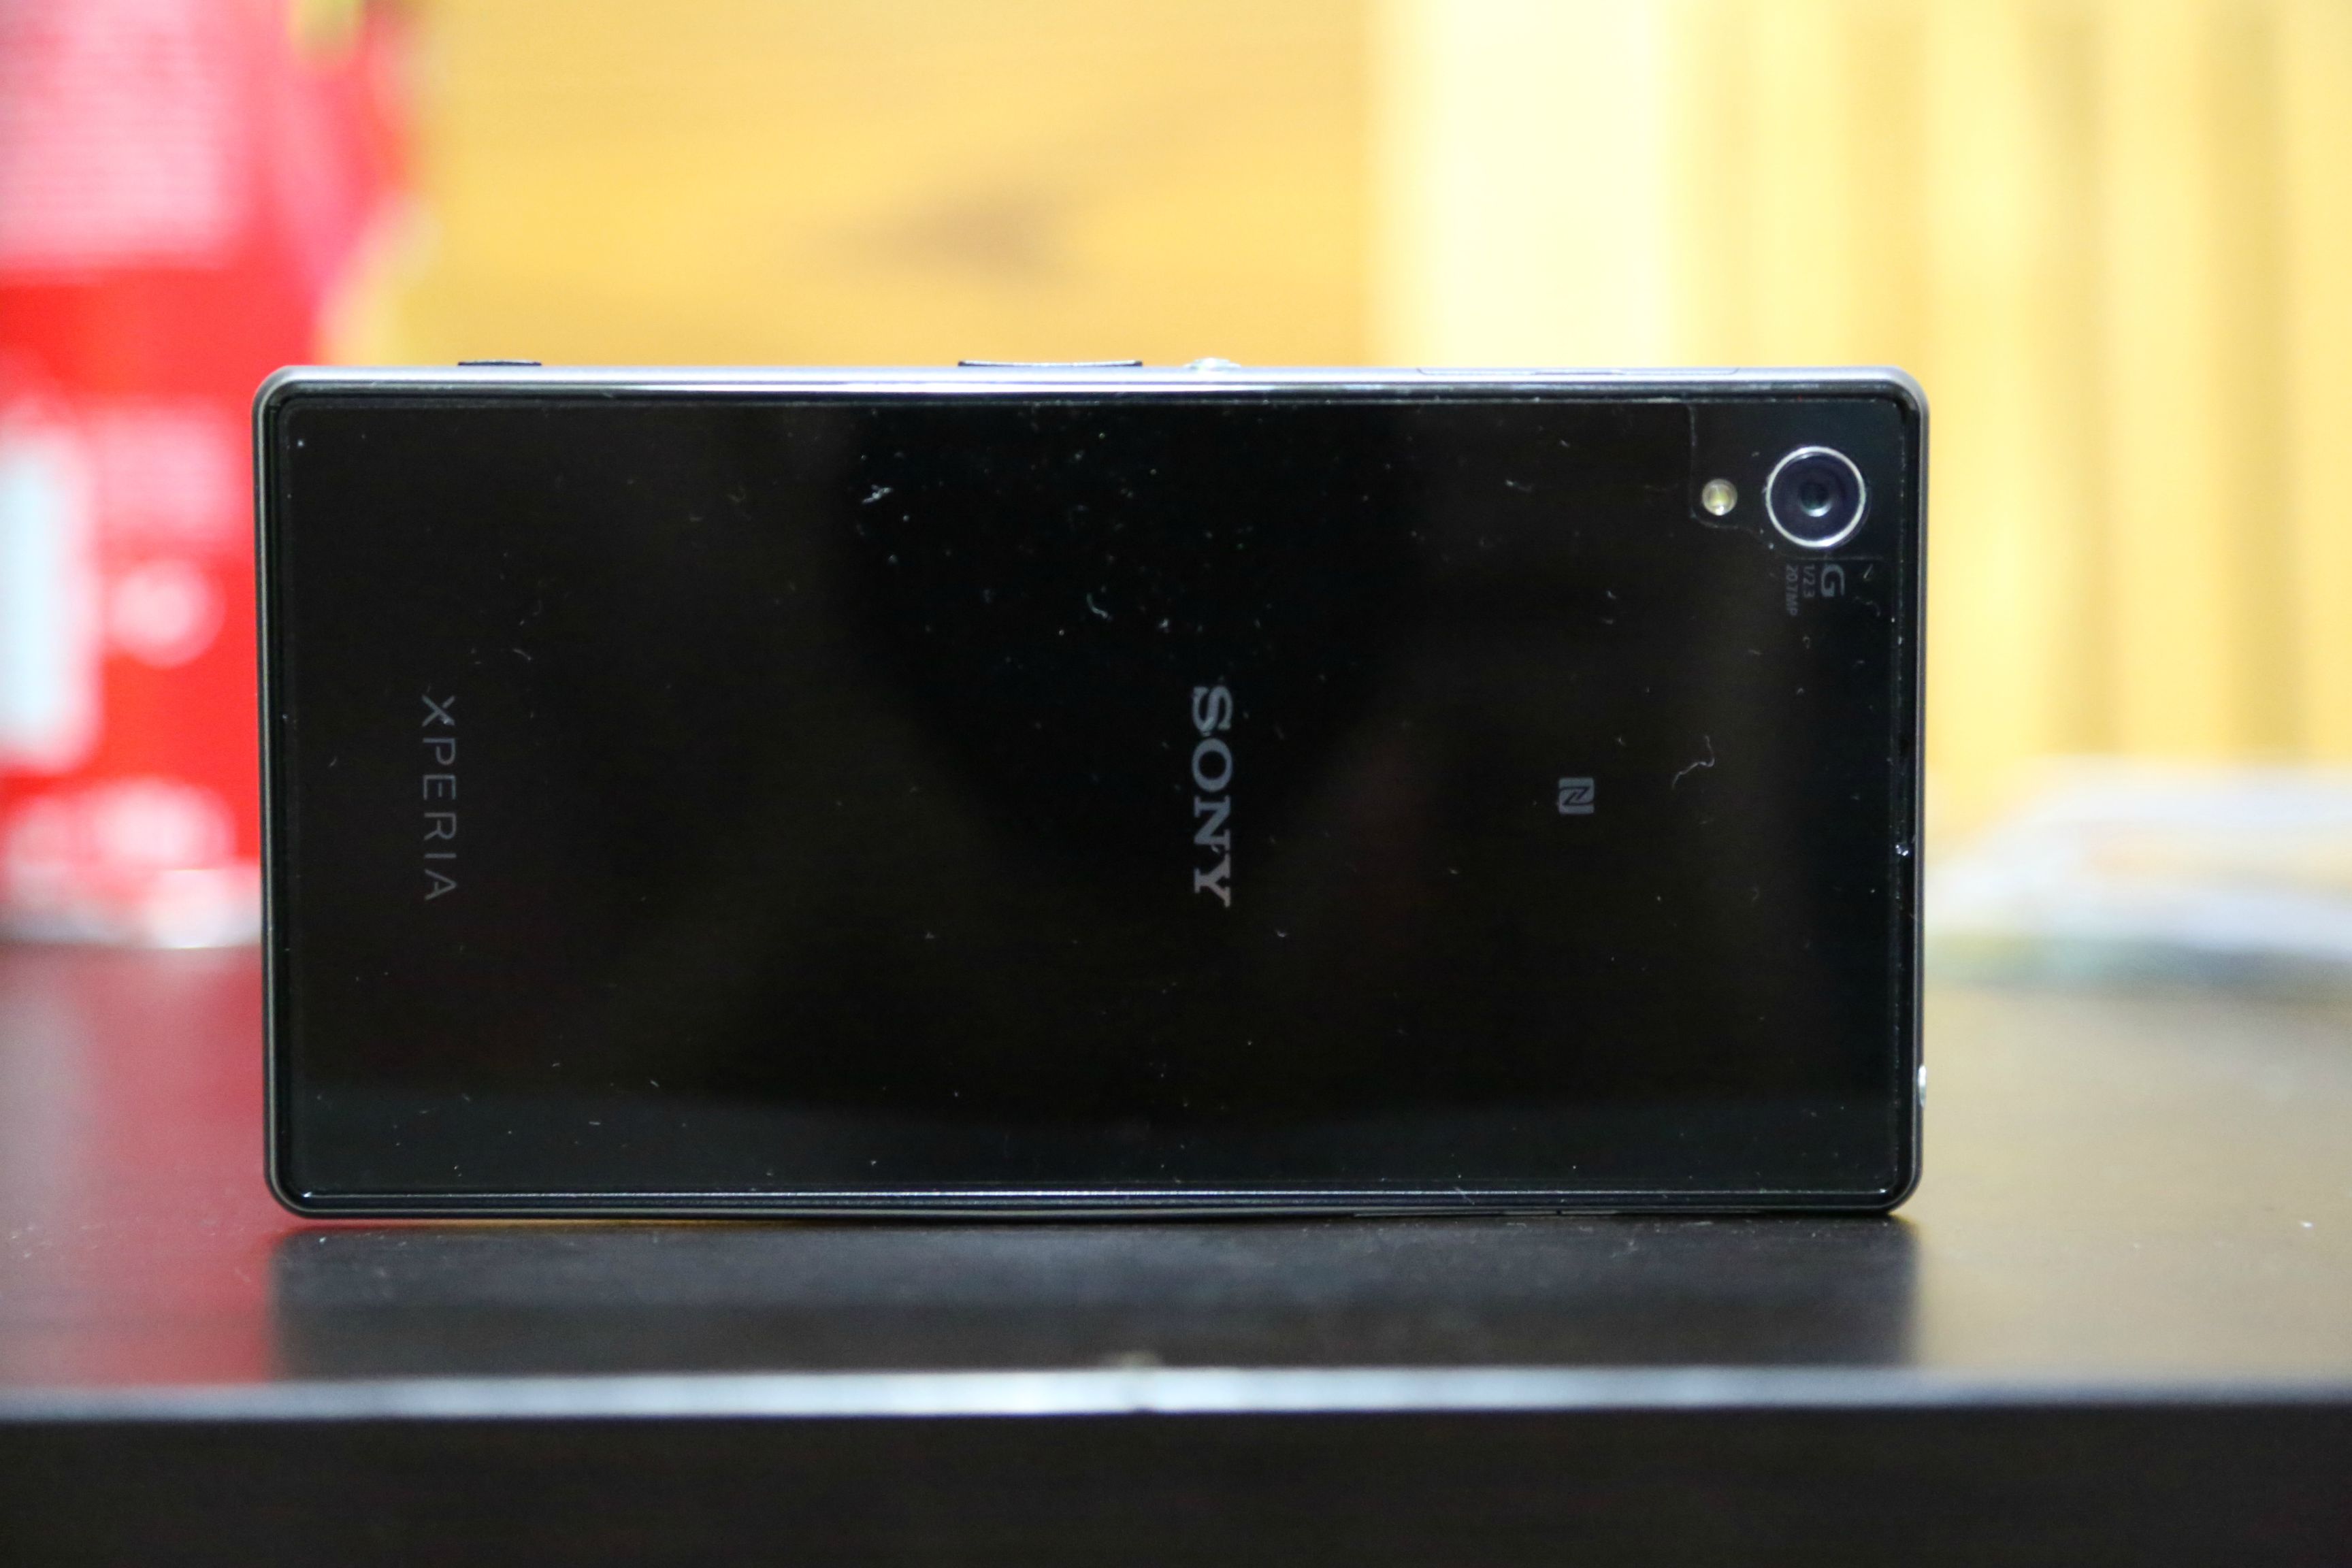 Xperia Z1 Bent appears - Sony compromised with build quality ?